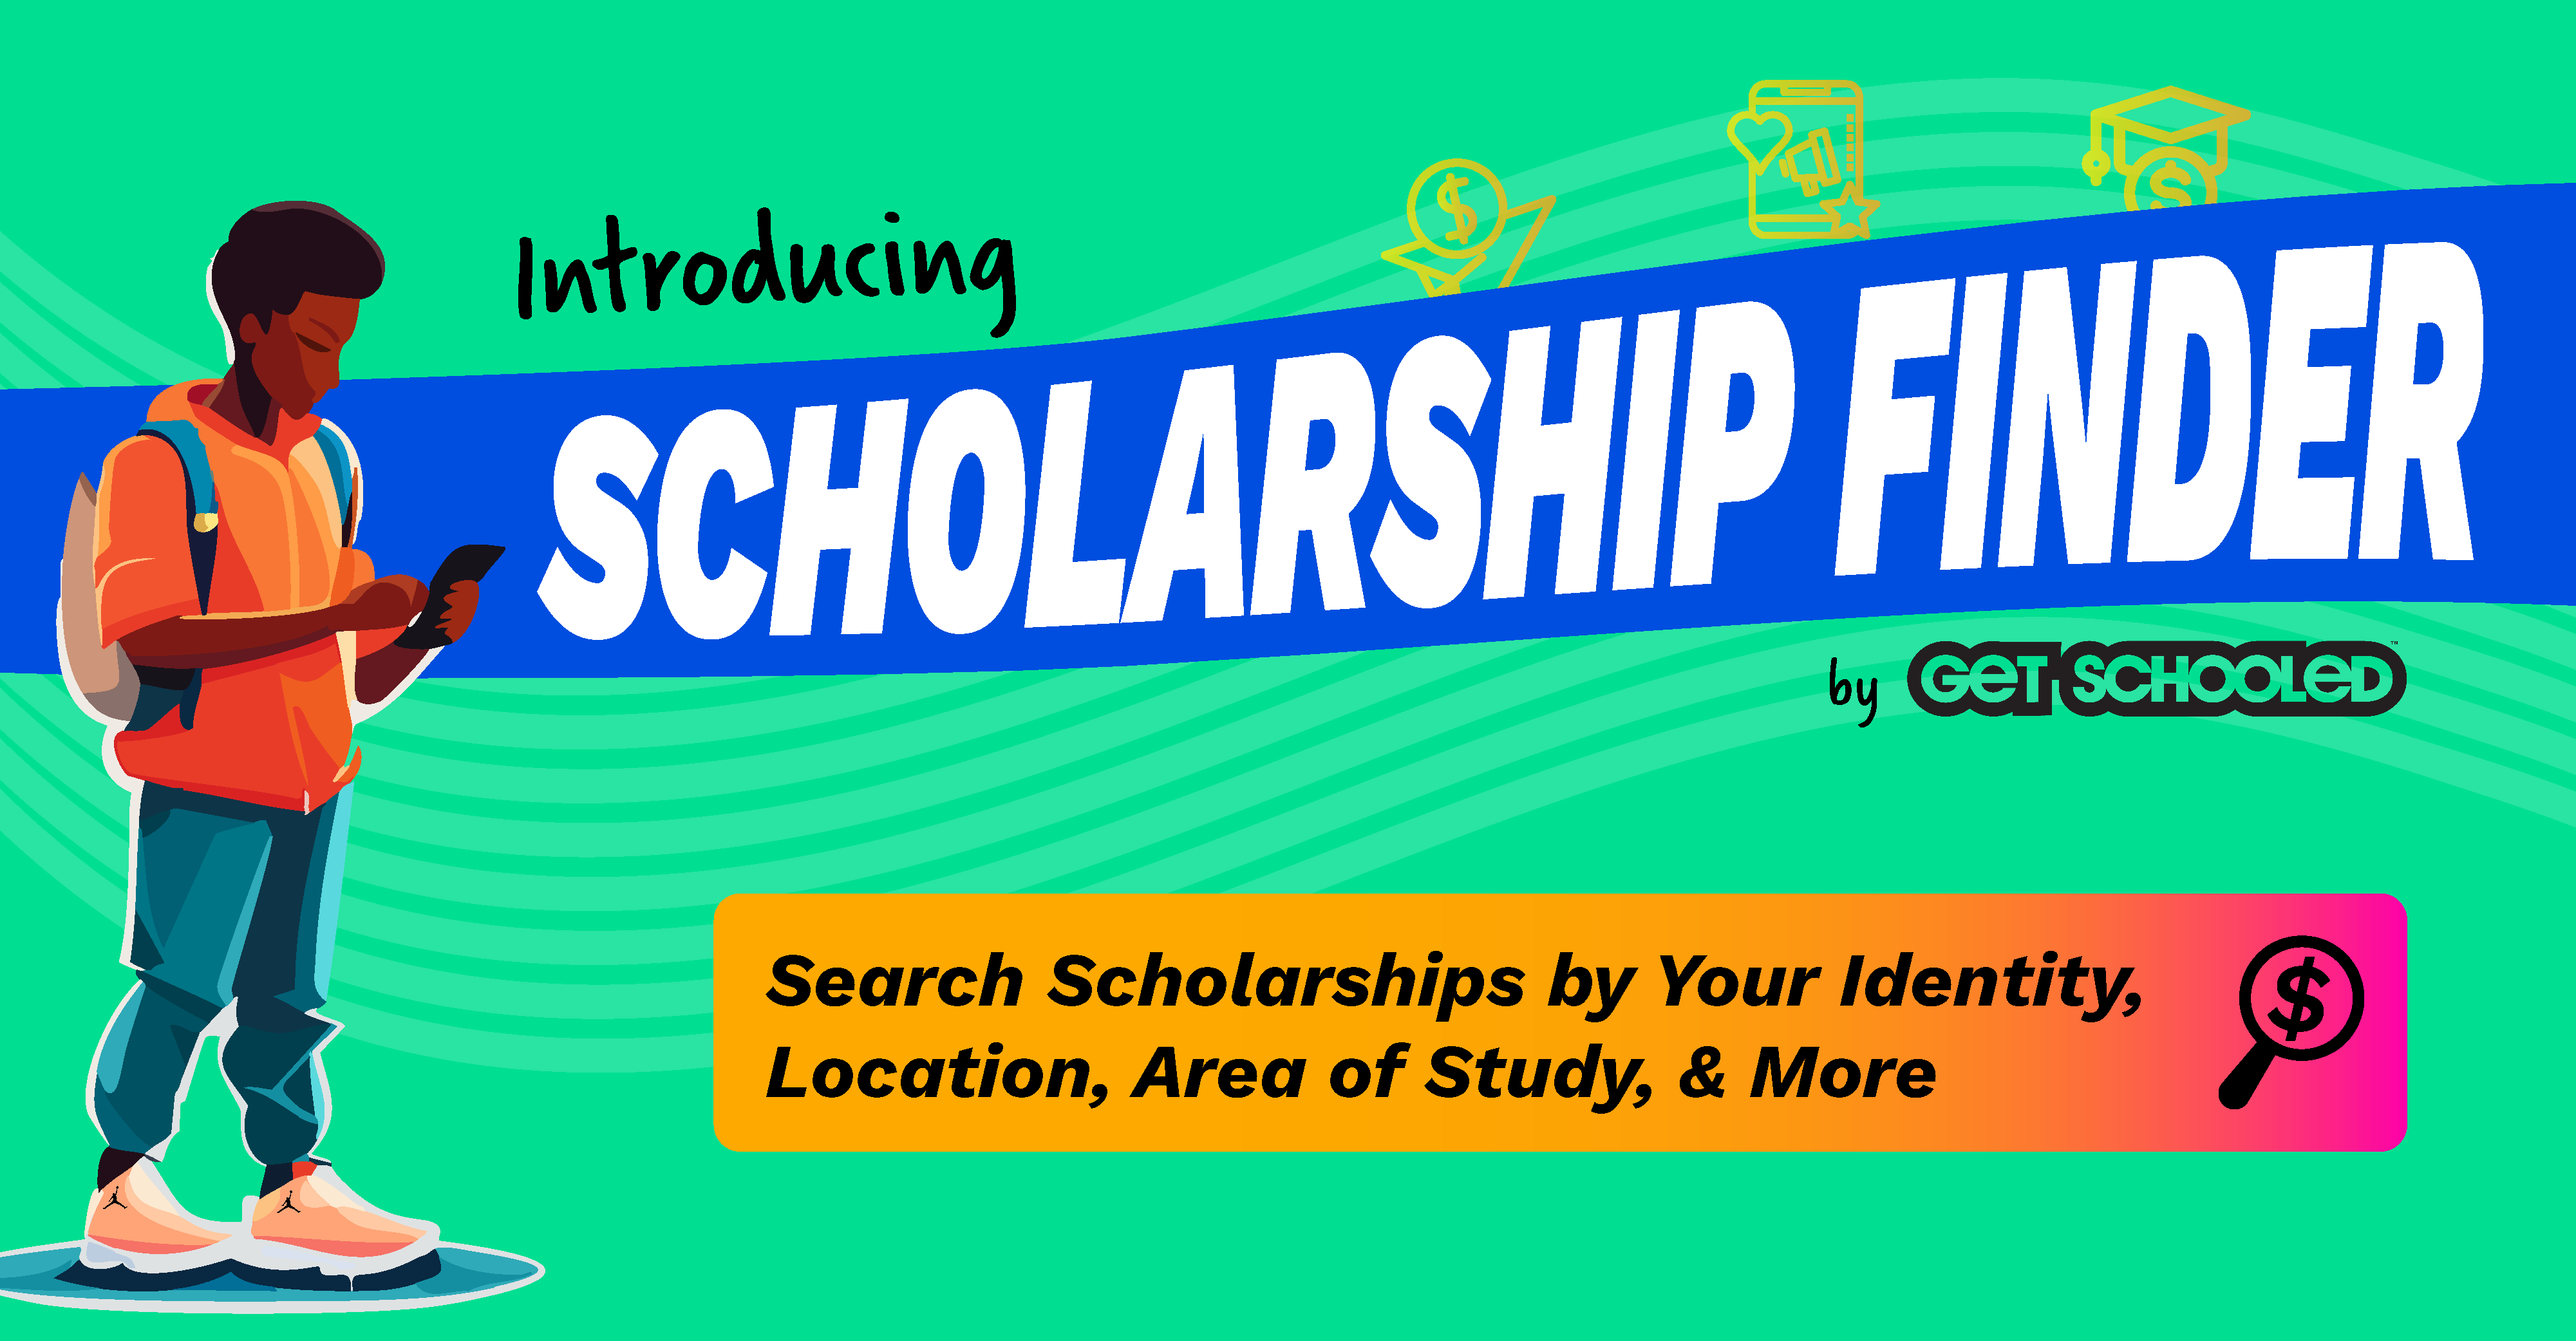 Illustration of a student (cartoon vector) with a backpack, gazing at their phone. The banner promotes the Get Schooled scholarship finder, stating, "Explore the Scholarship Finder by GET SCHOOLED: Discover Opportunities Based on Your Identity, Location, Area of Study, & More." - Applying for Scholarships: Common Questions & Answers